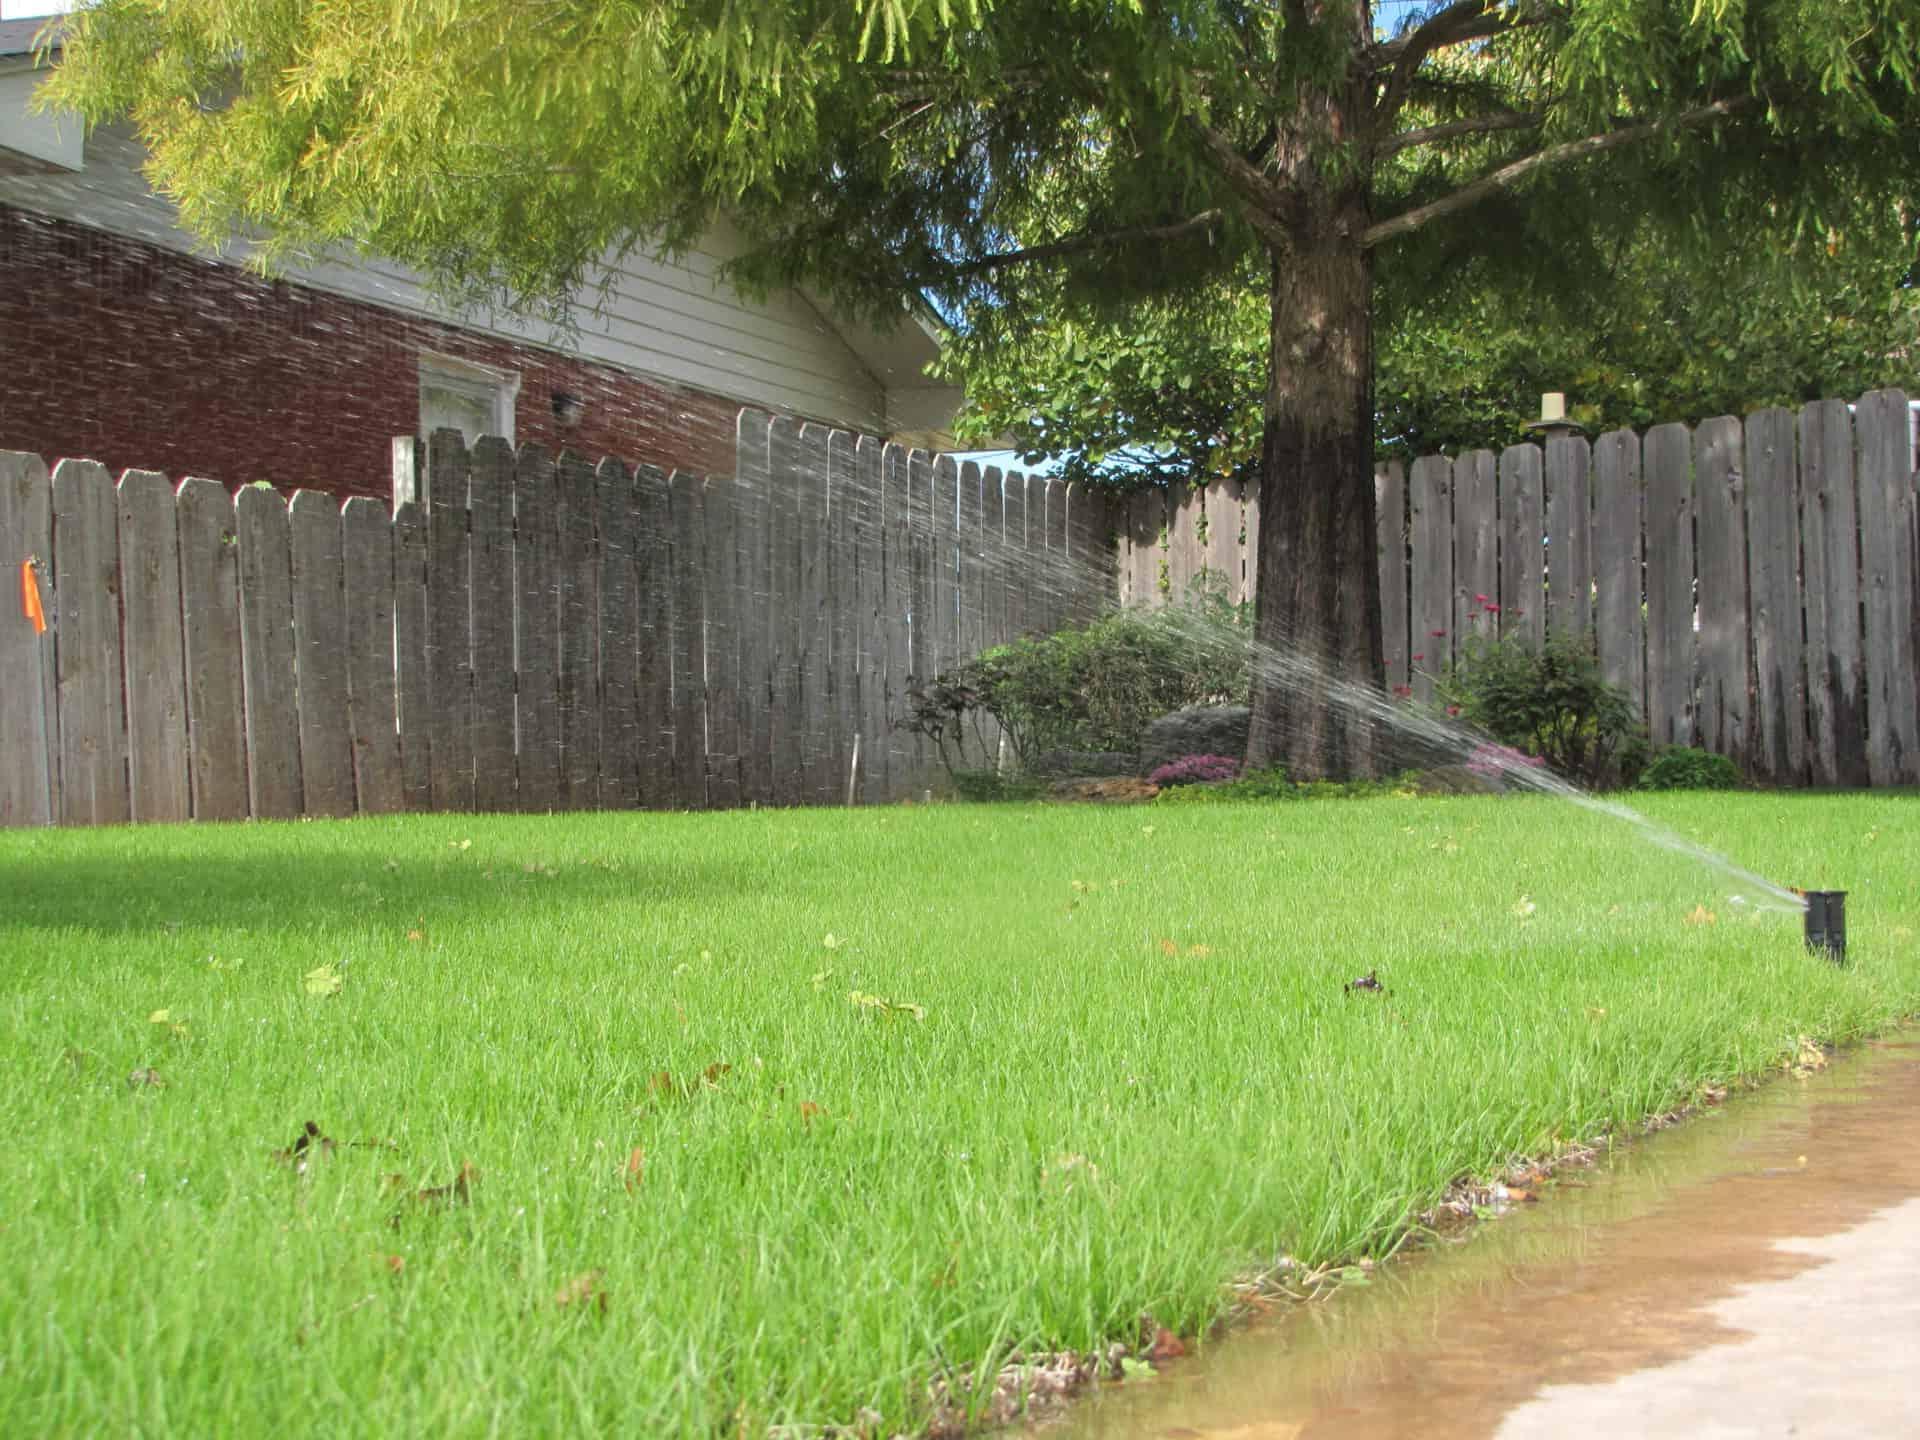 Grass being watered by in-ground sprinkler